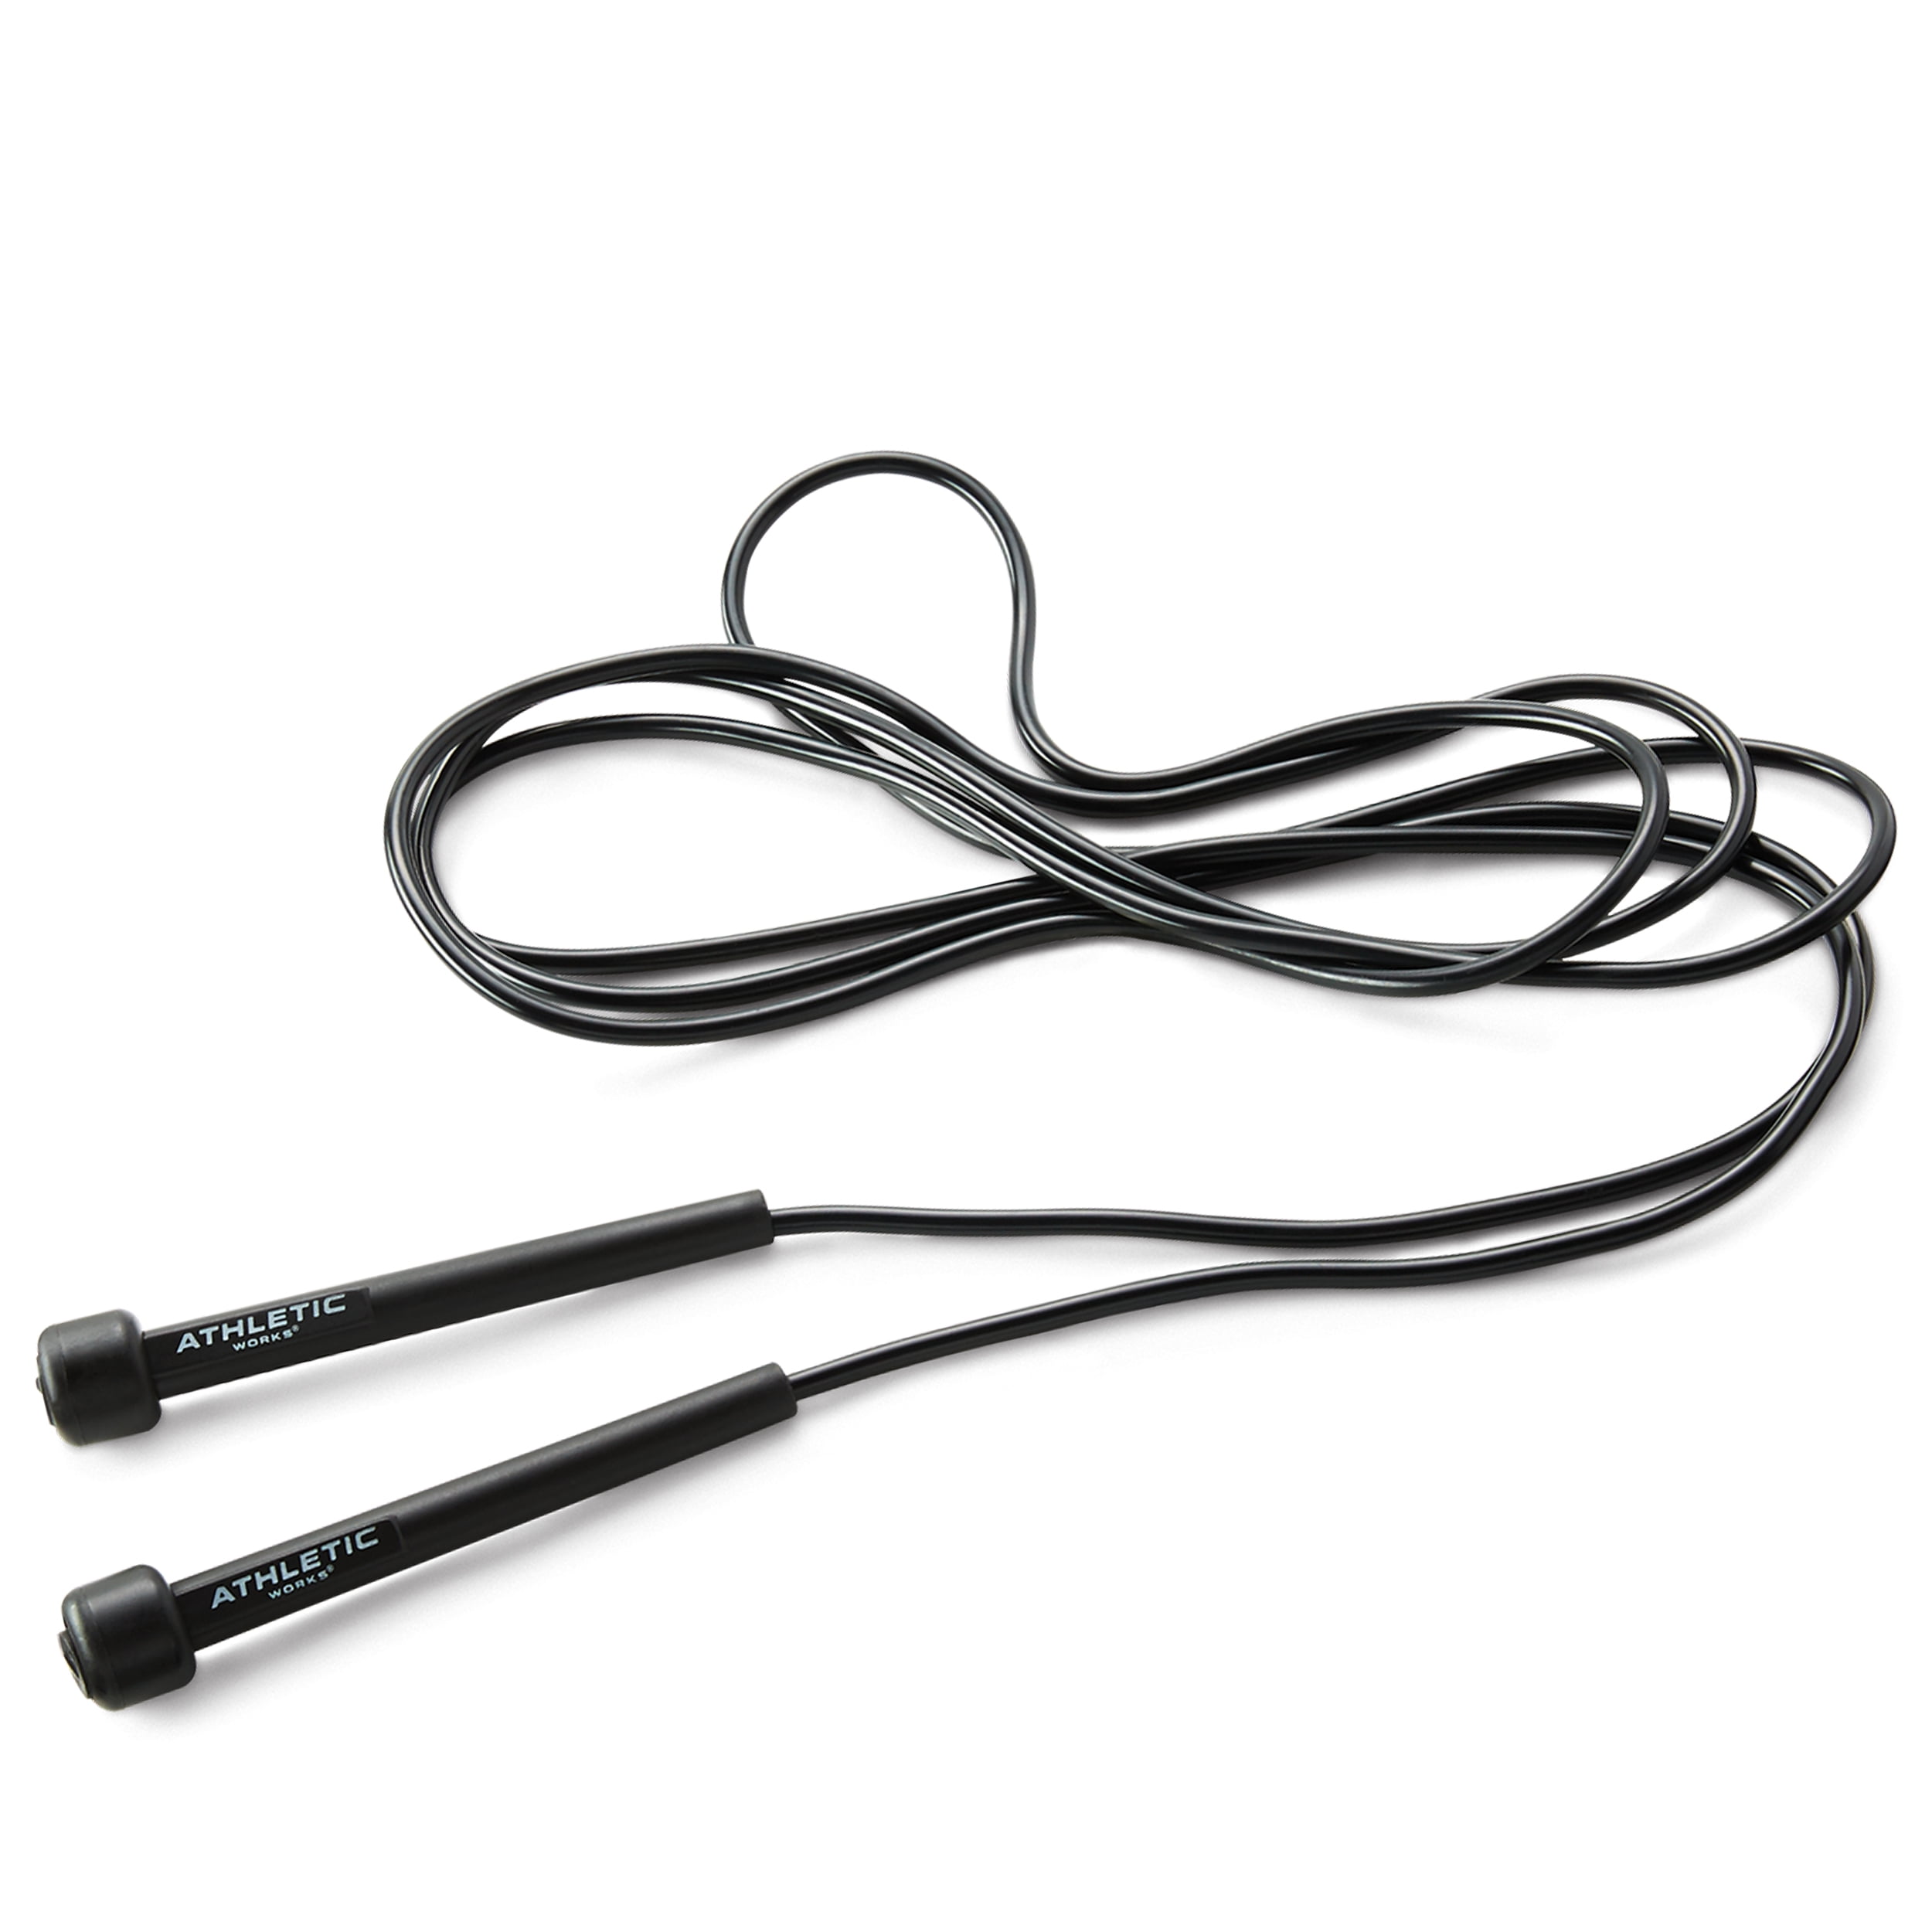 Speed Jump Rope Skipping Rope Adjustable Length Gym Home Workout Excercise Tool